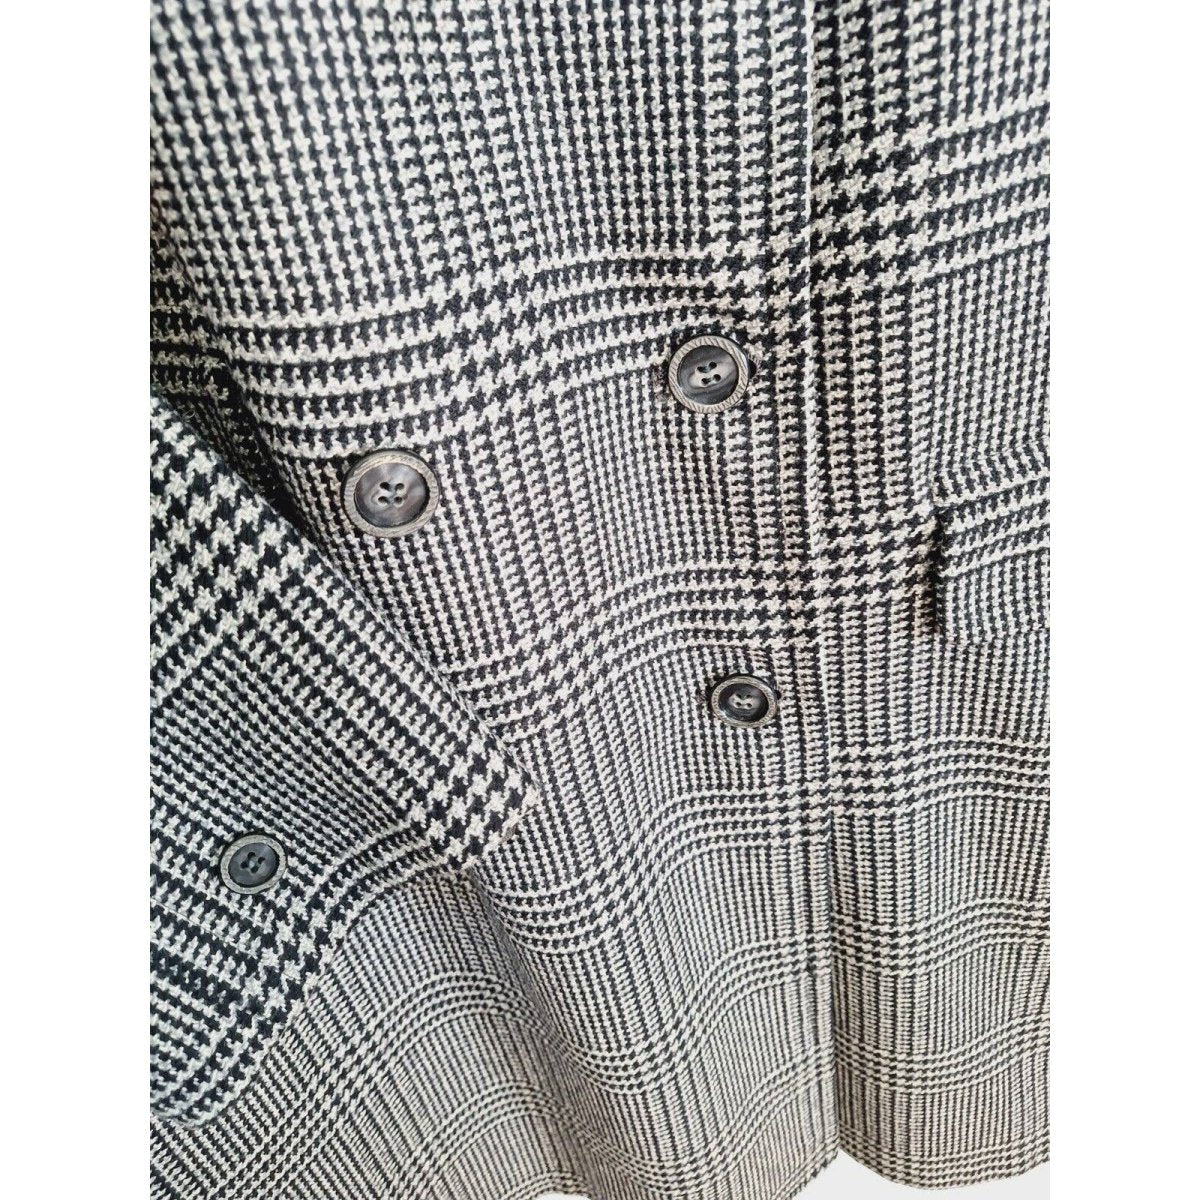 Vintage 60s Botany 500 Wool Plaid Topcoat Size 40R - themallvintage The Mall Vintage